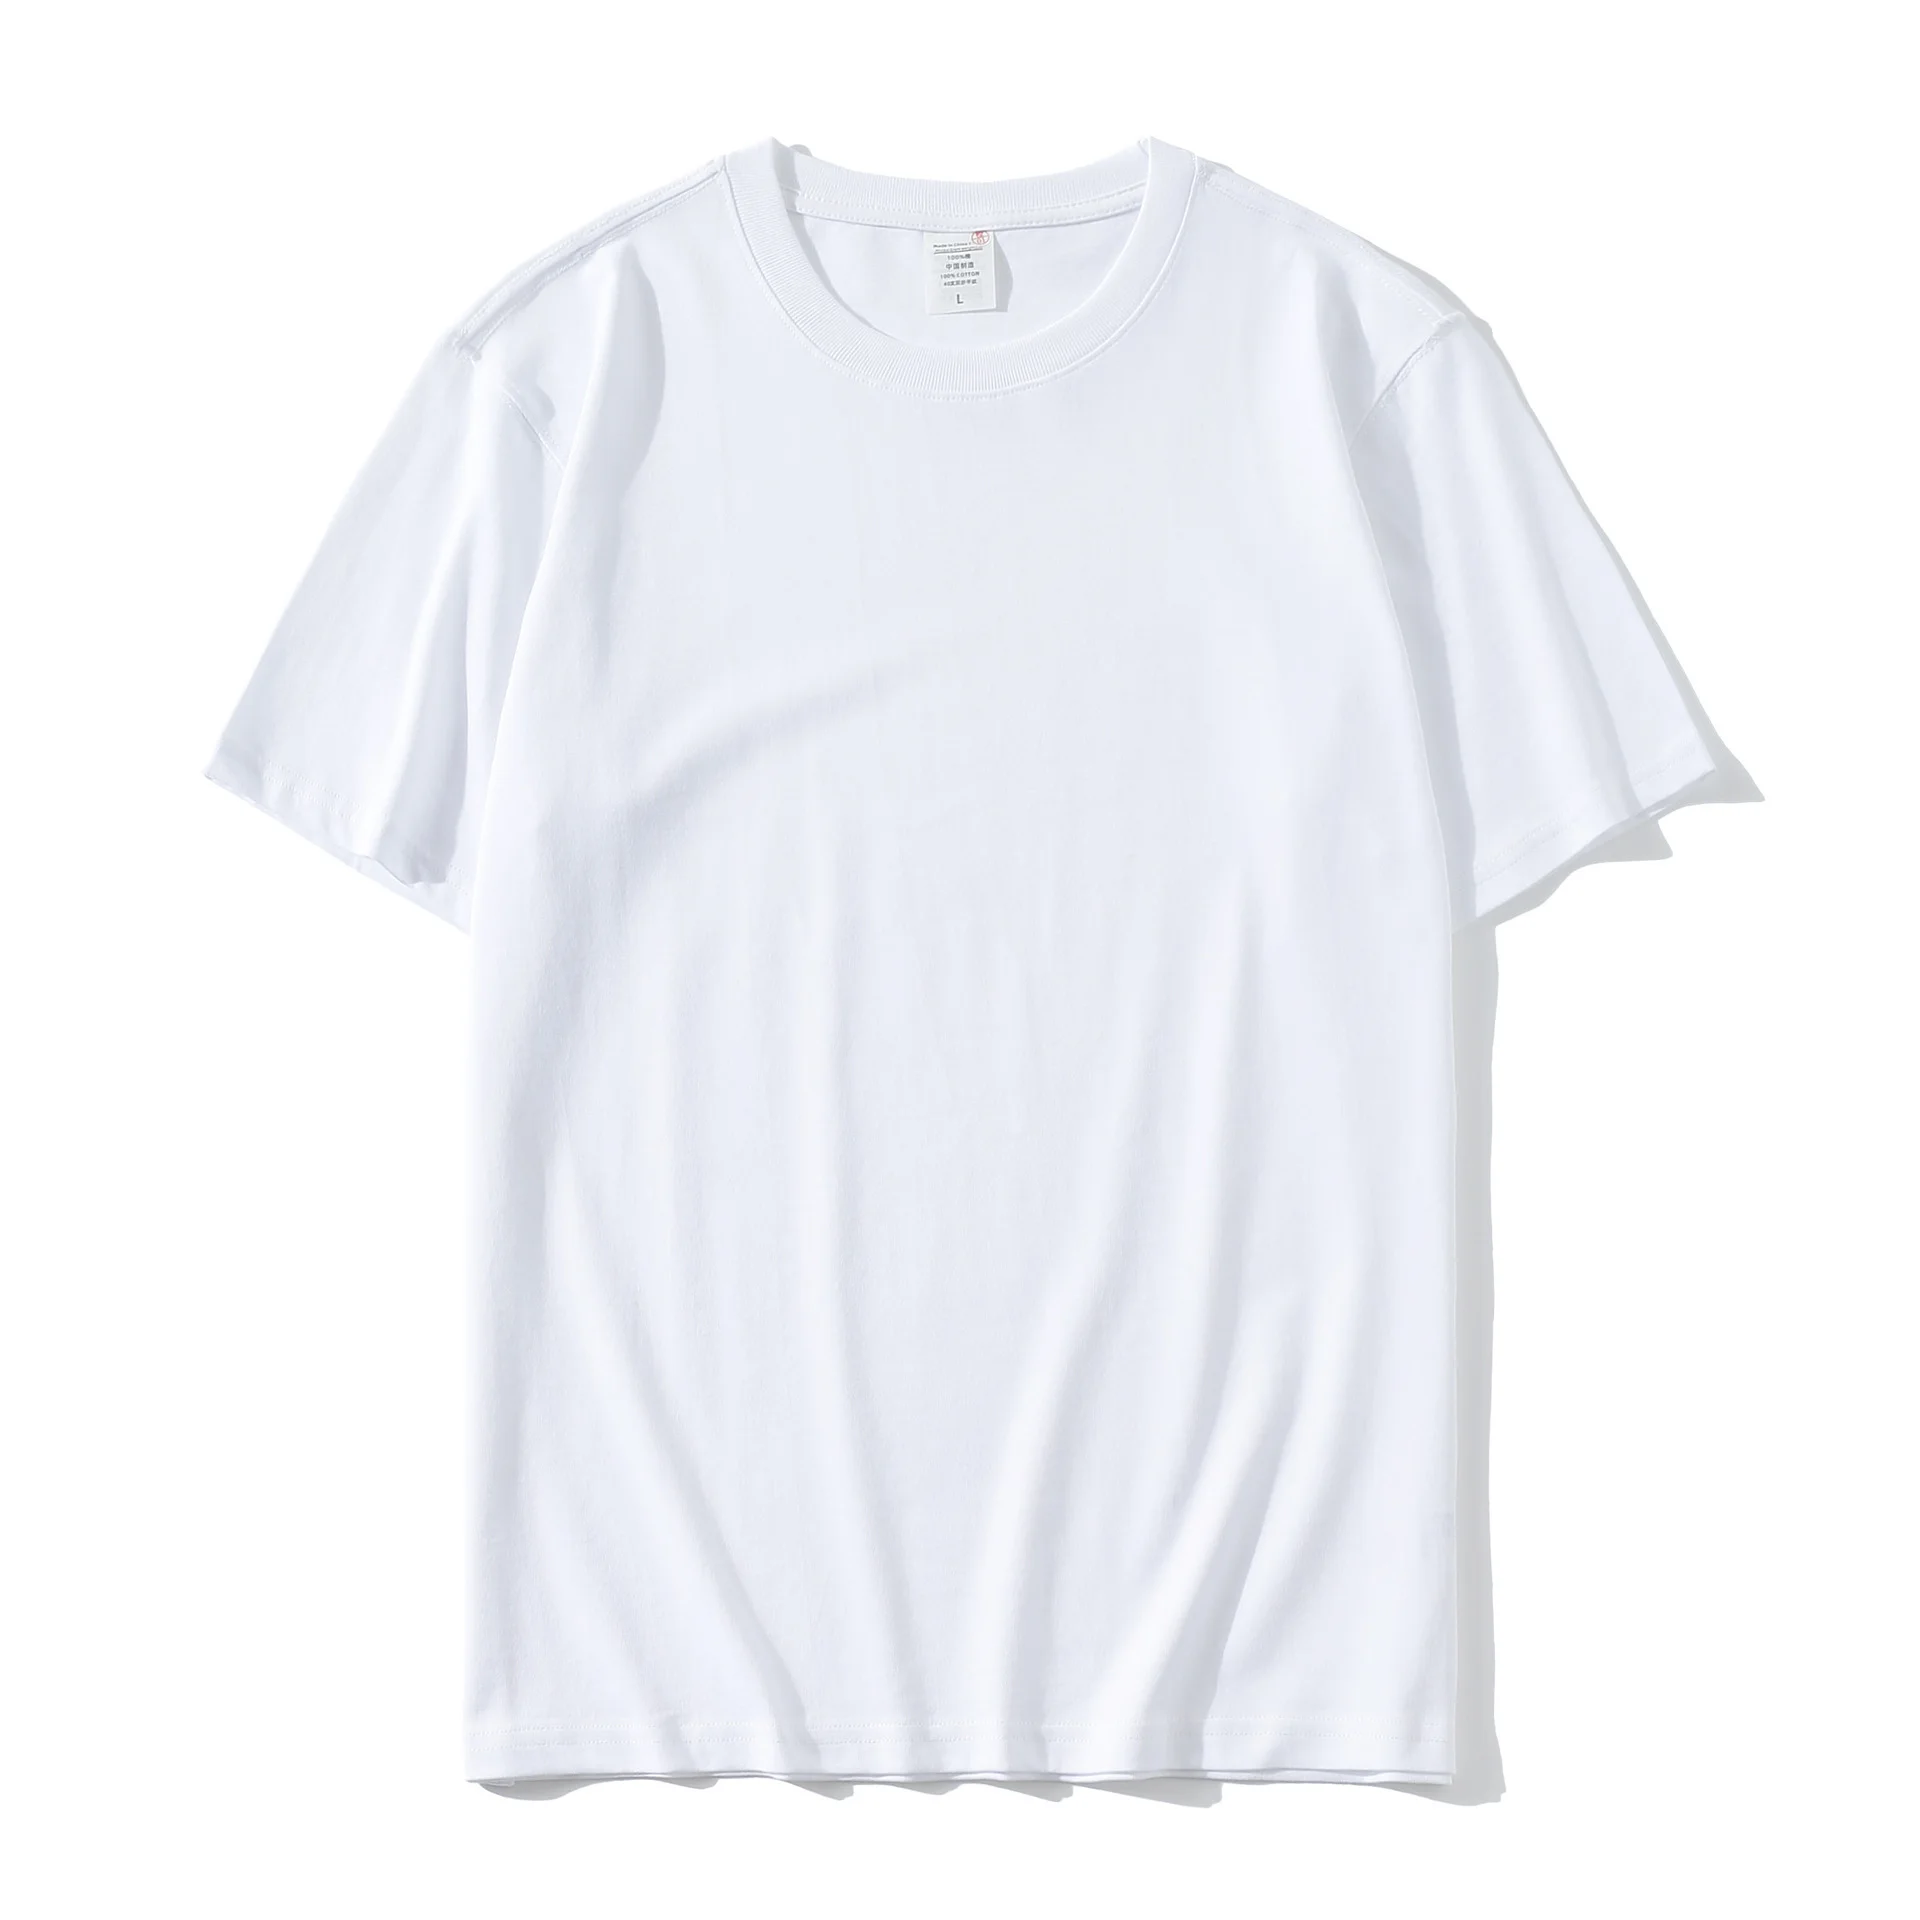 Wholesale Blank T shirts for Printing in Ivanovo